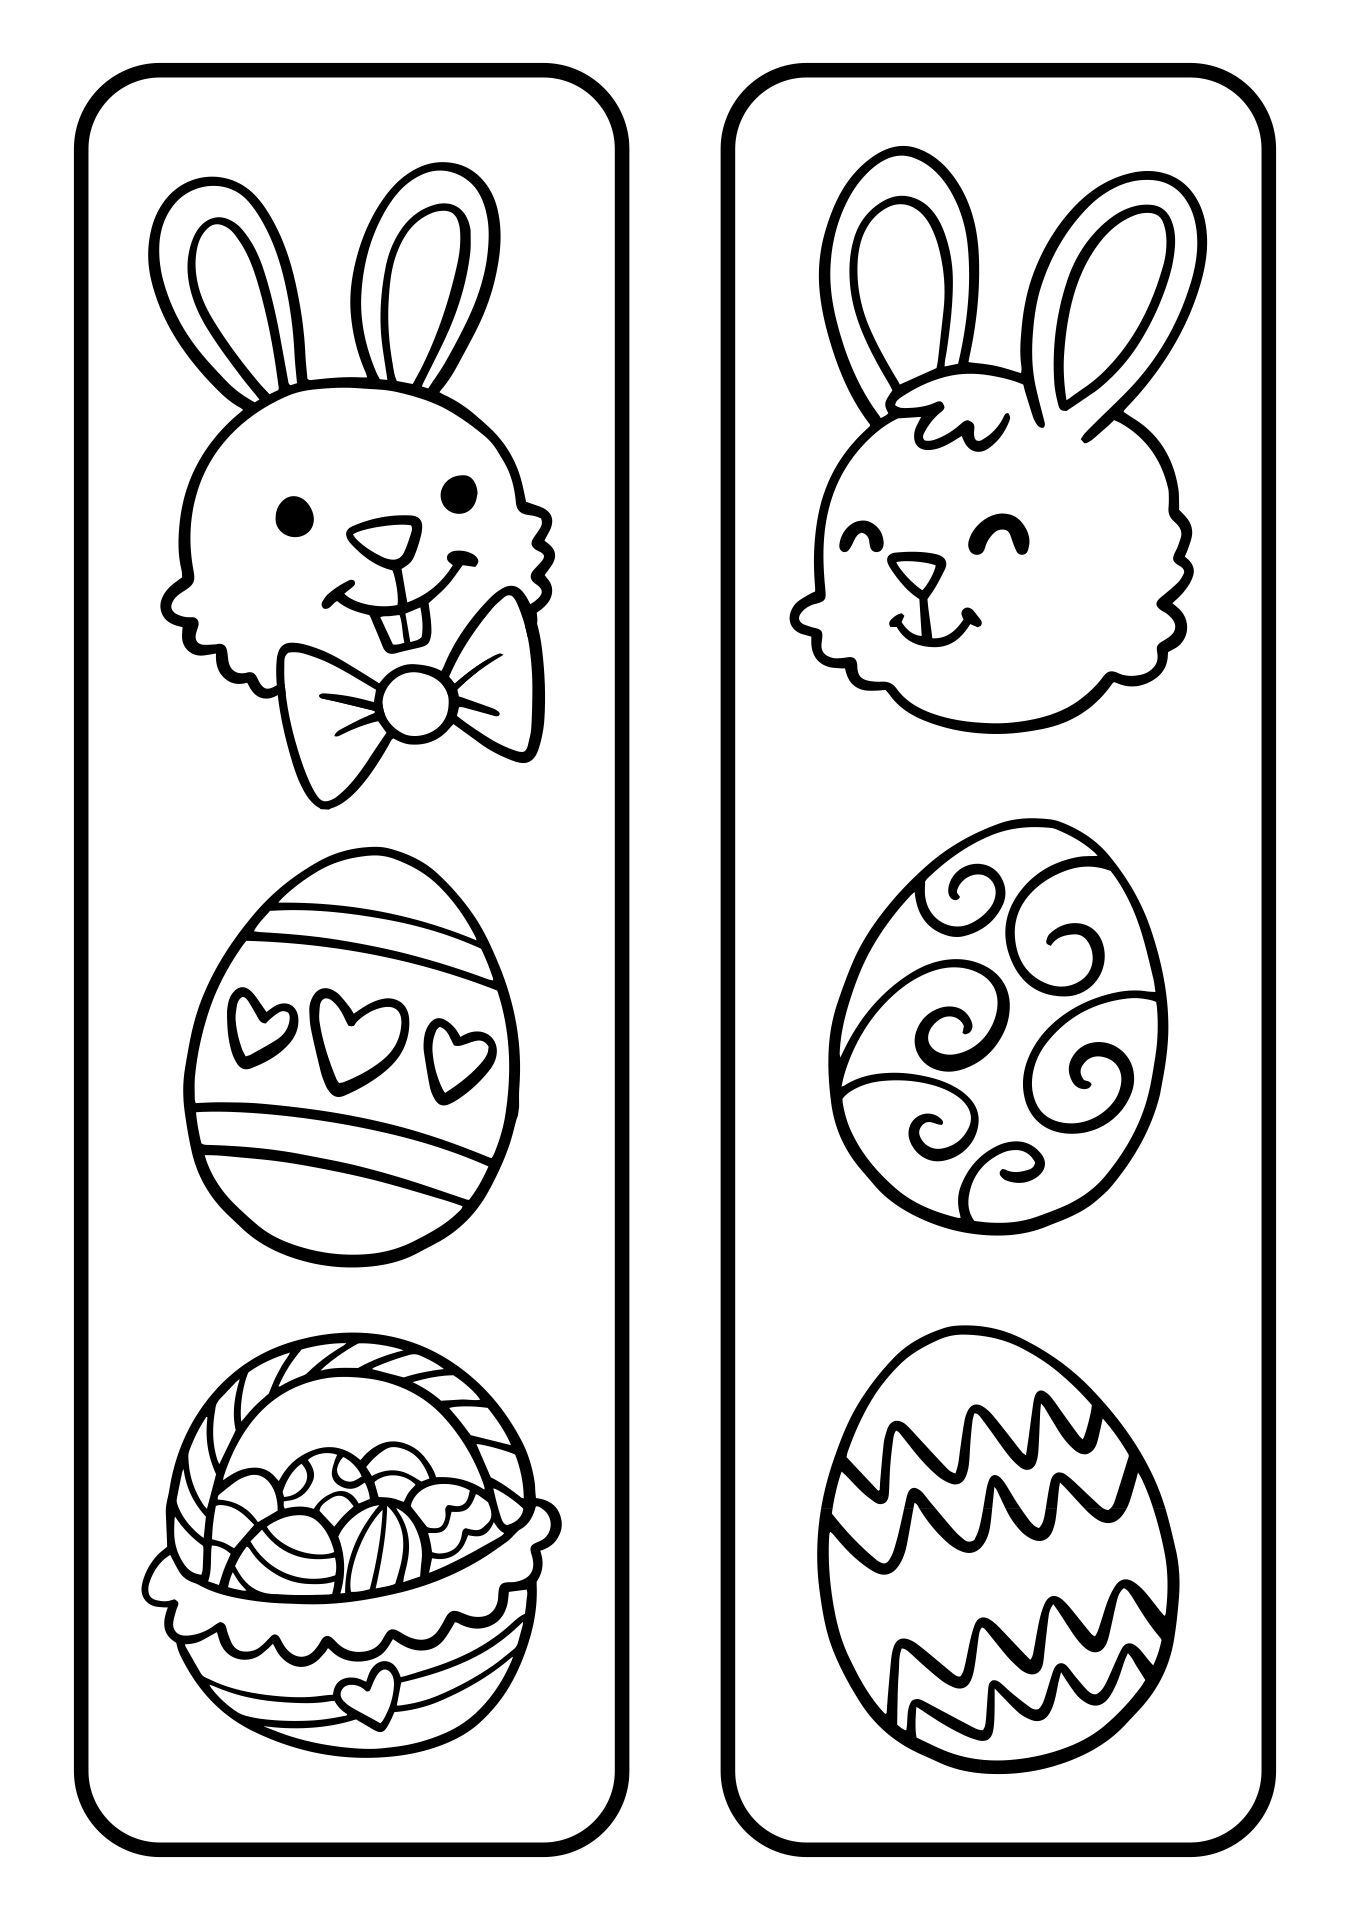 Little Bunny Printable Bookmarks To Color